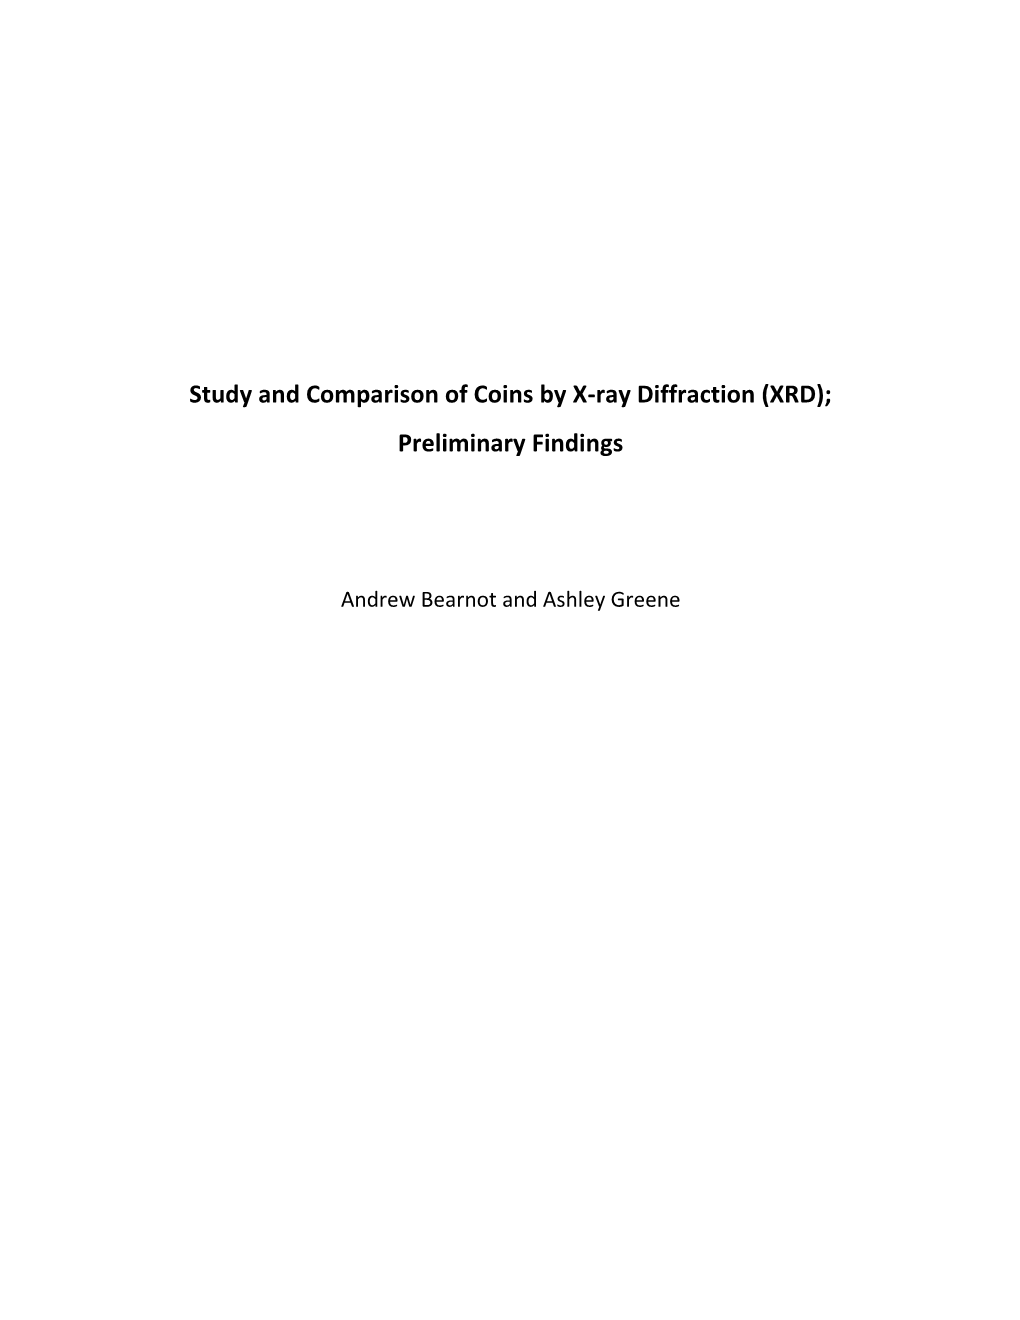 Study and Comparison of Coins by X-Ray Diffraction (XRD); Preliminary Findings